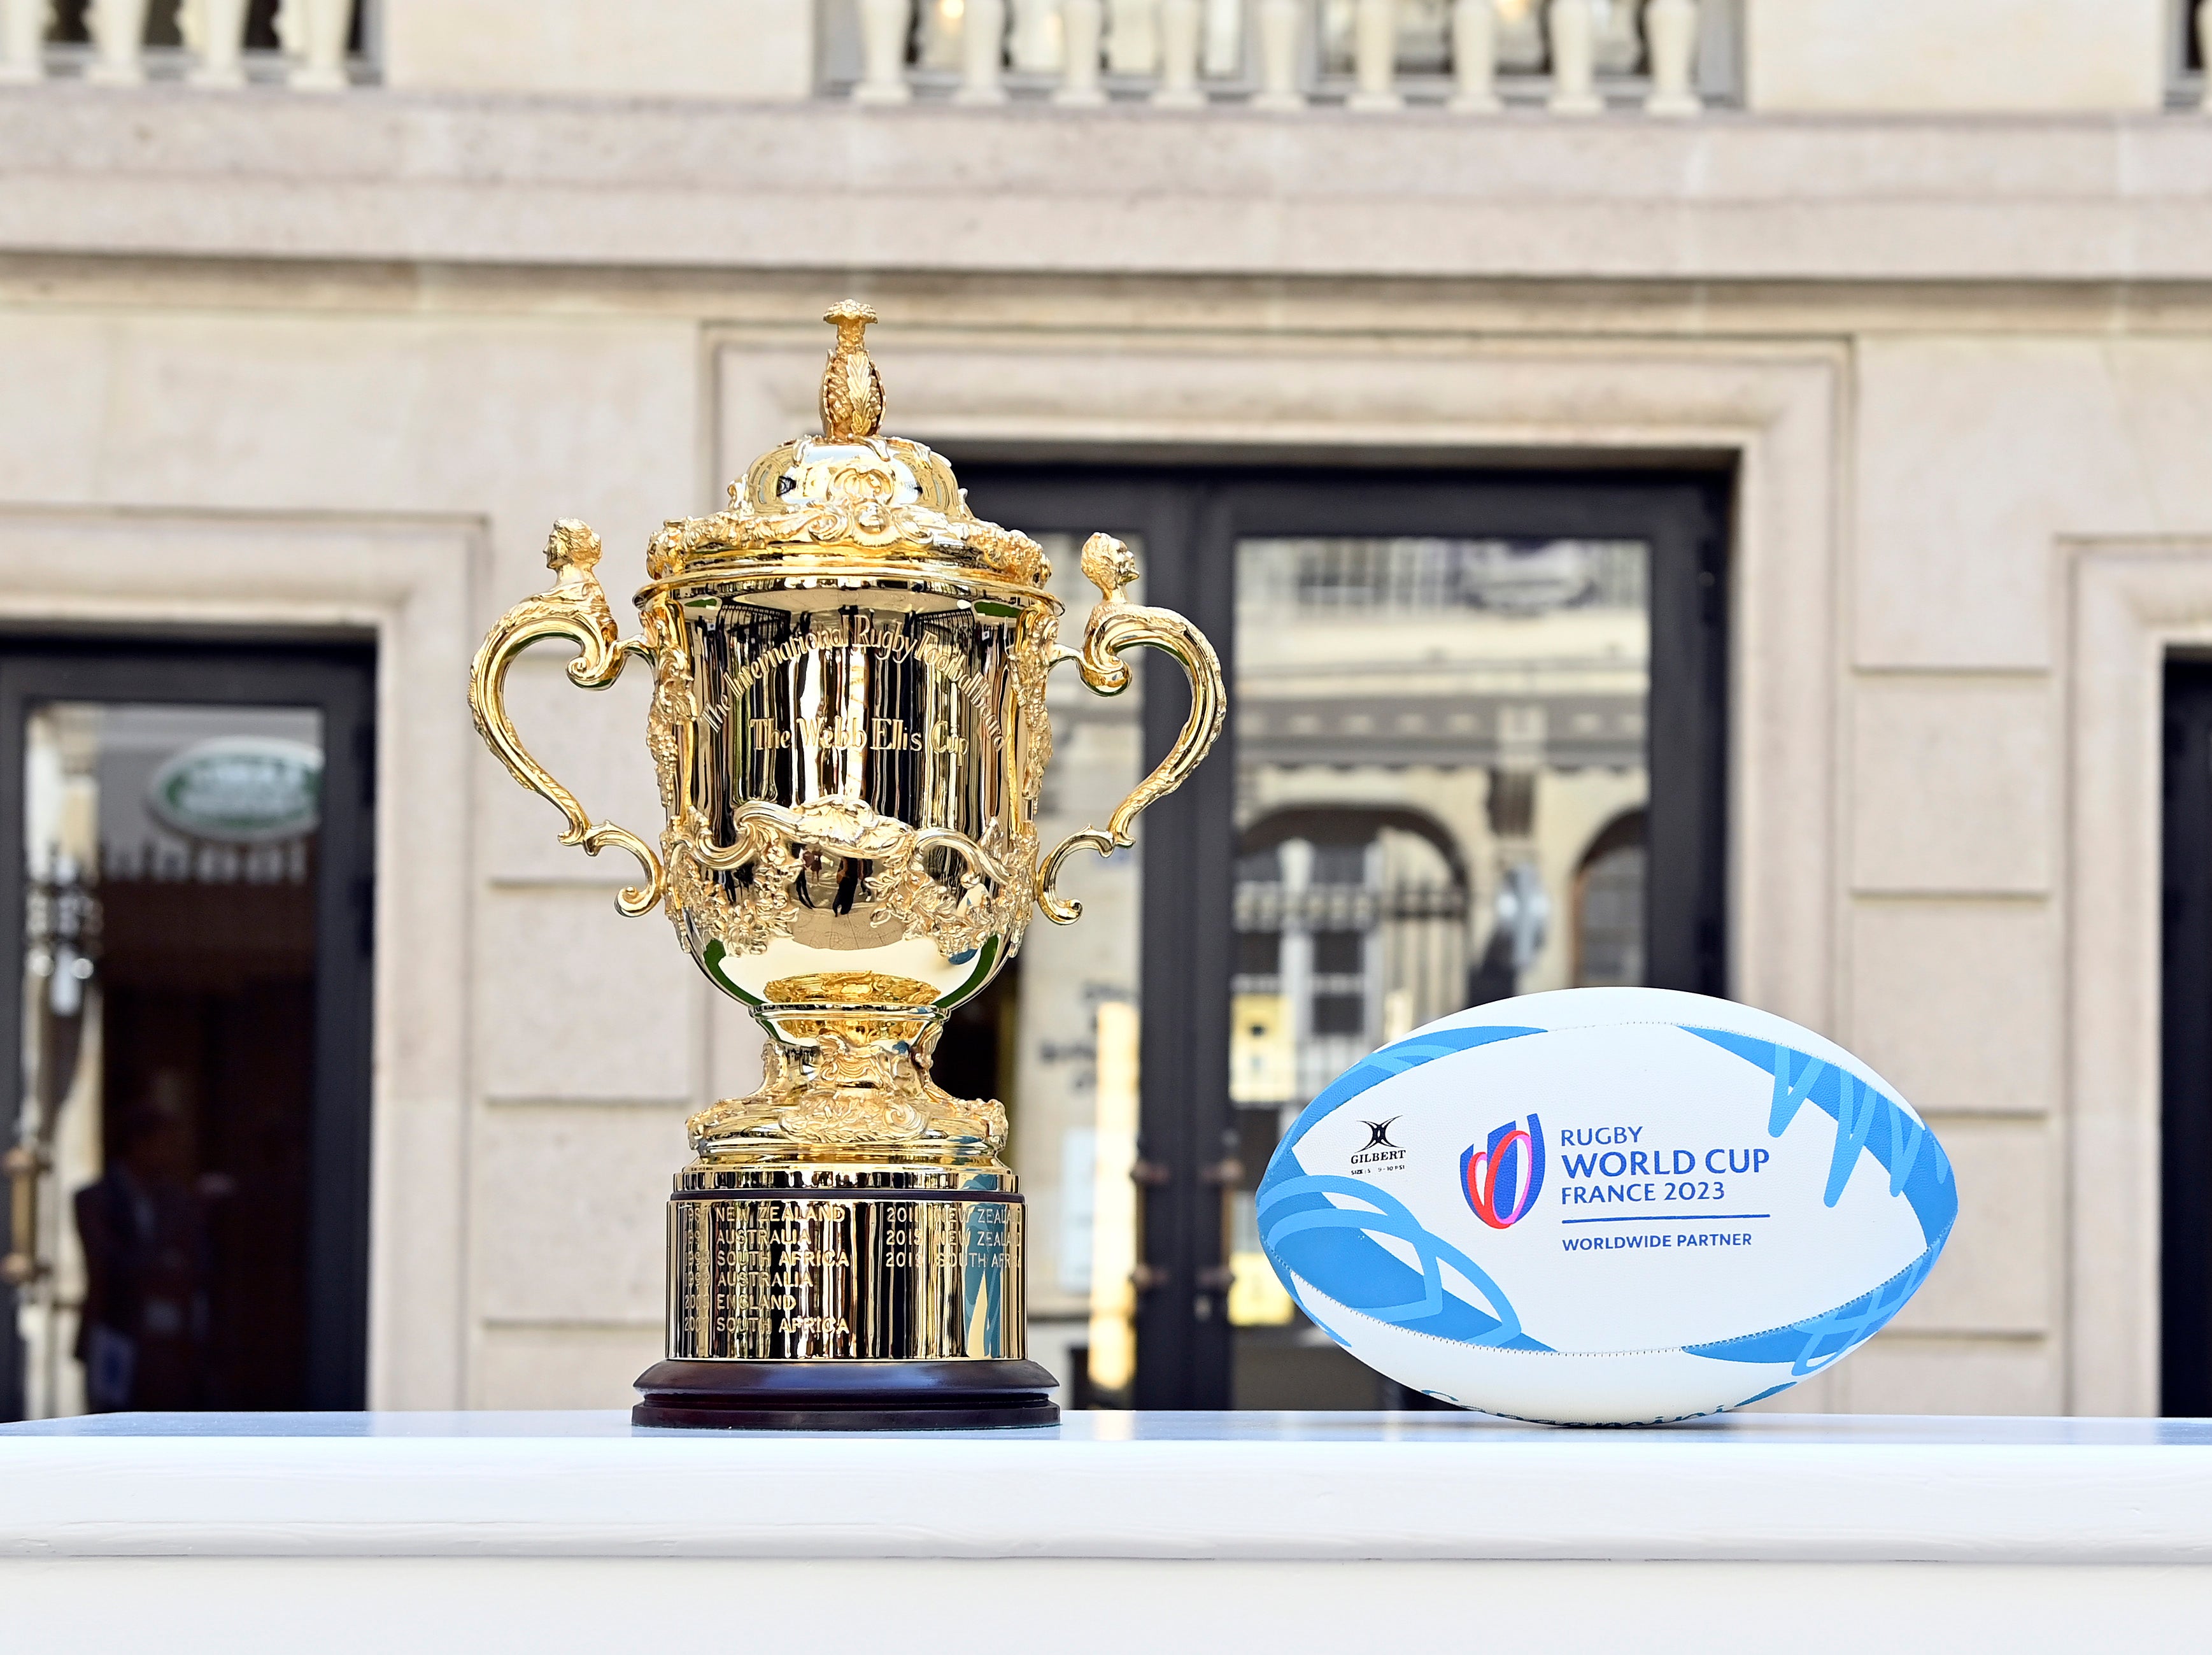 The Rugby World Cup trophy